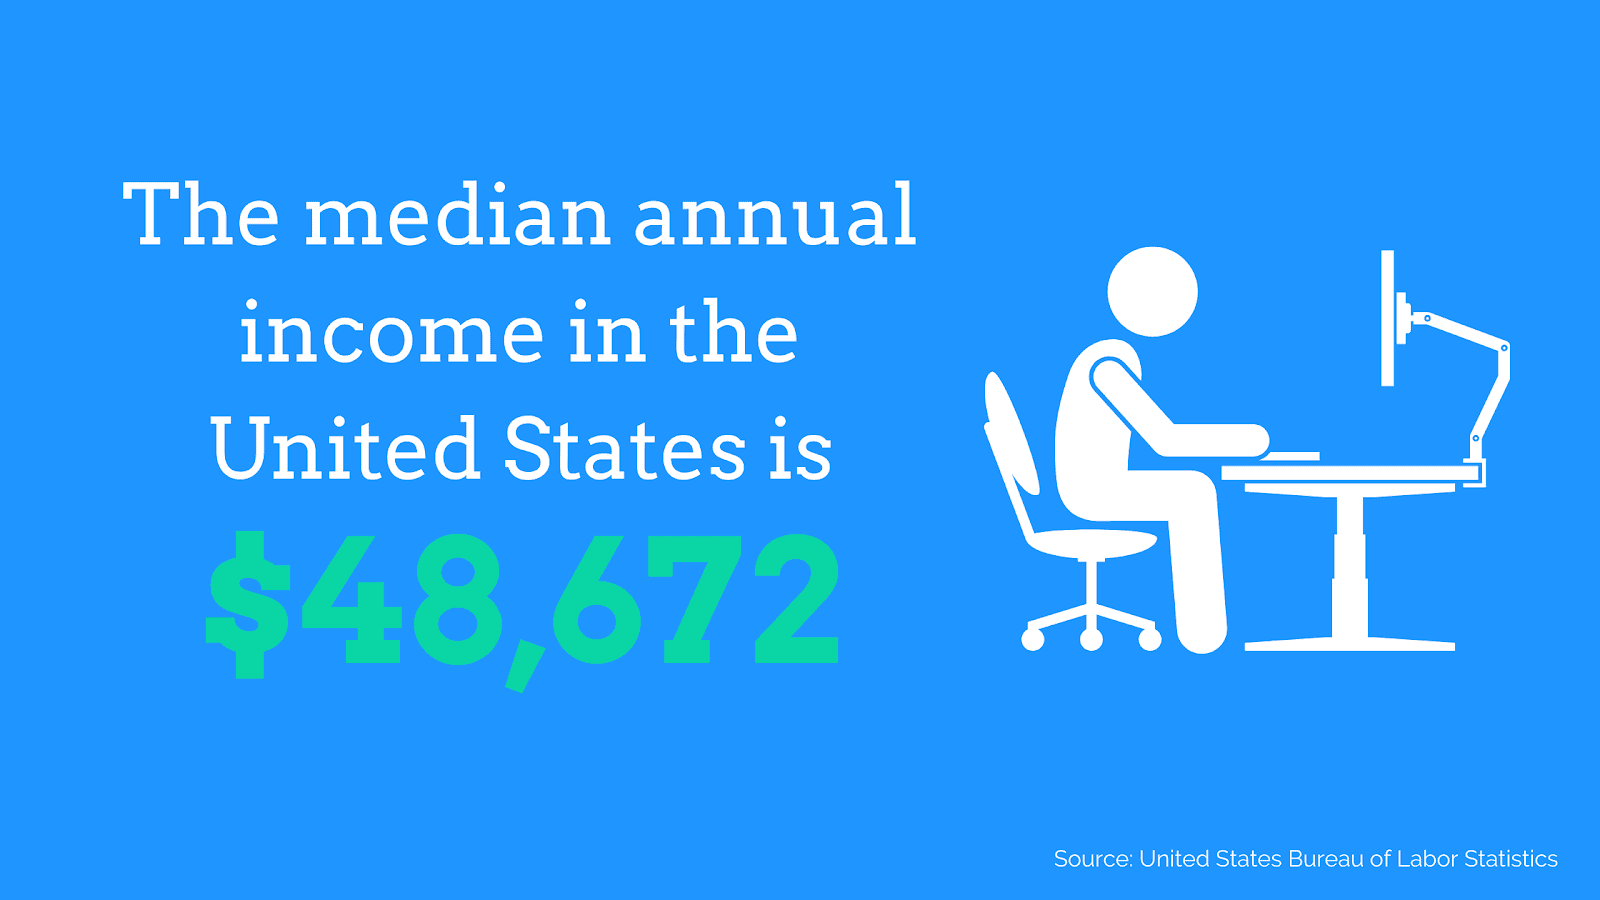 US median annual income